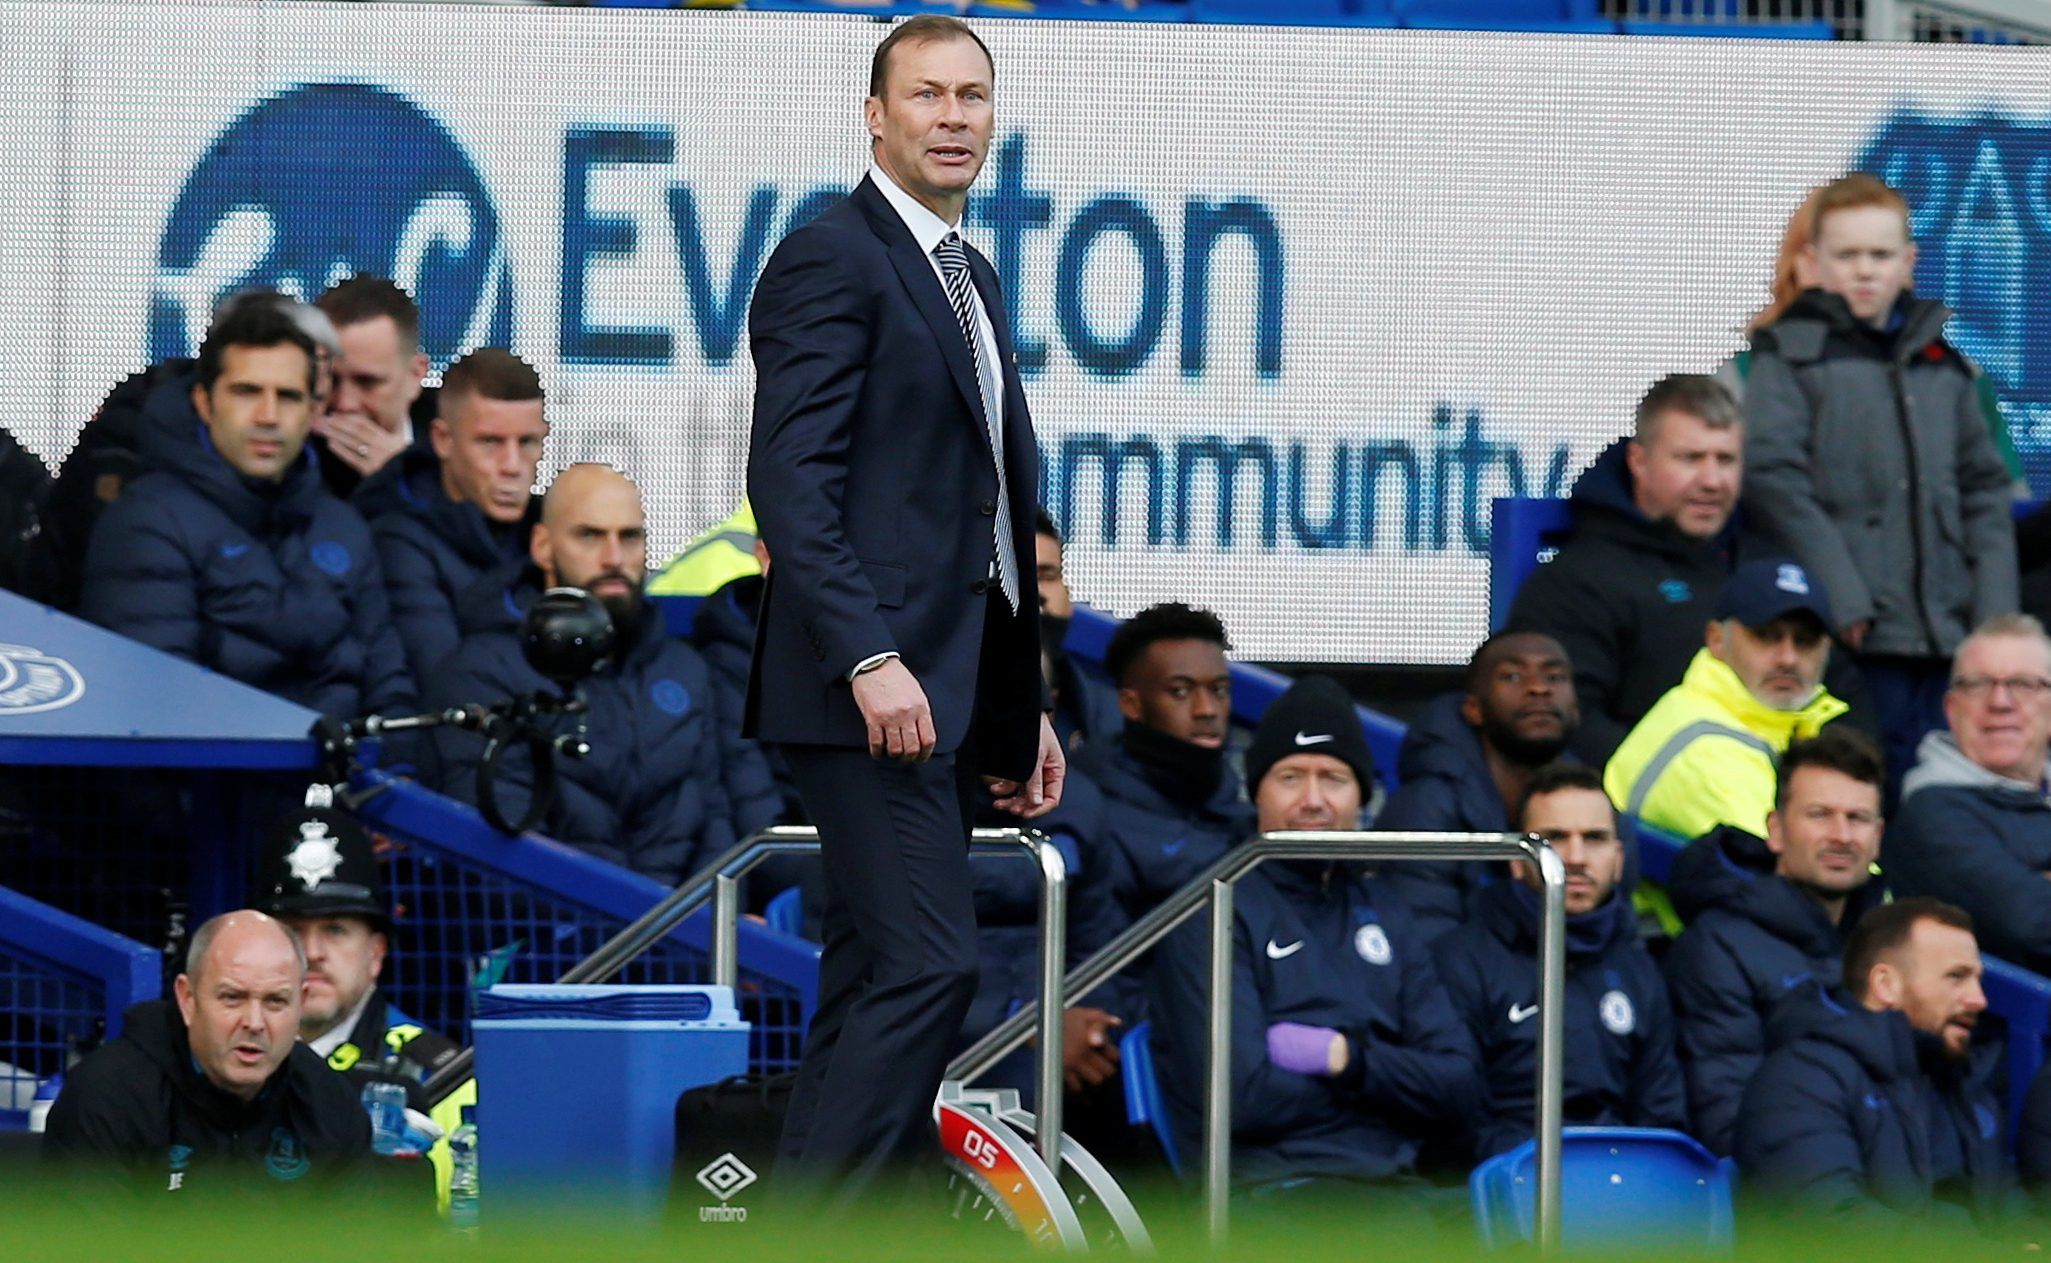 Soccer Football - Premier League - Everton v Chelsea - Goodison Park, Liverpool, Britain - December 7, 2019  Everton interim manager Duncan Ferguson  REUTERS/Andrew Yates  EDITORIAL USE ONLY. No use with unauthorized audio, video, data, fixture lists, club/league logos or 